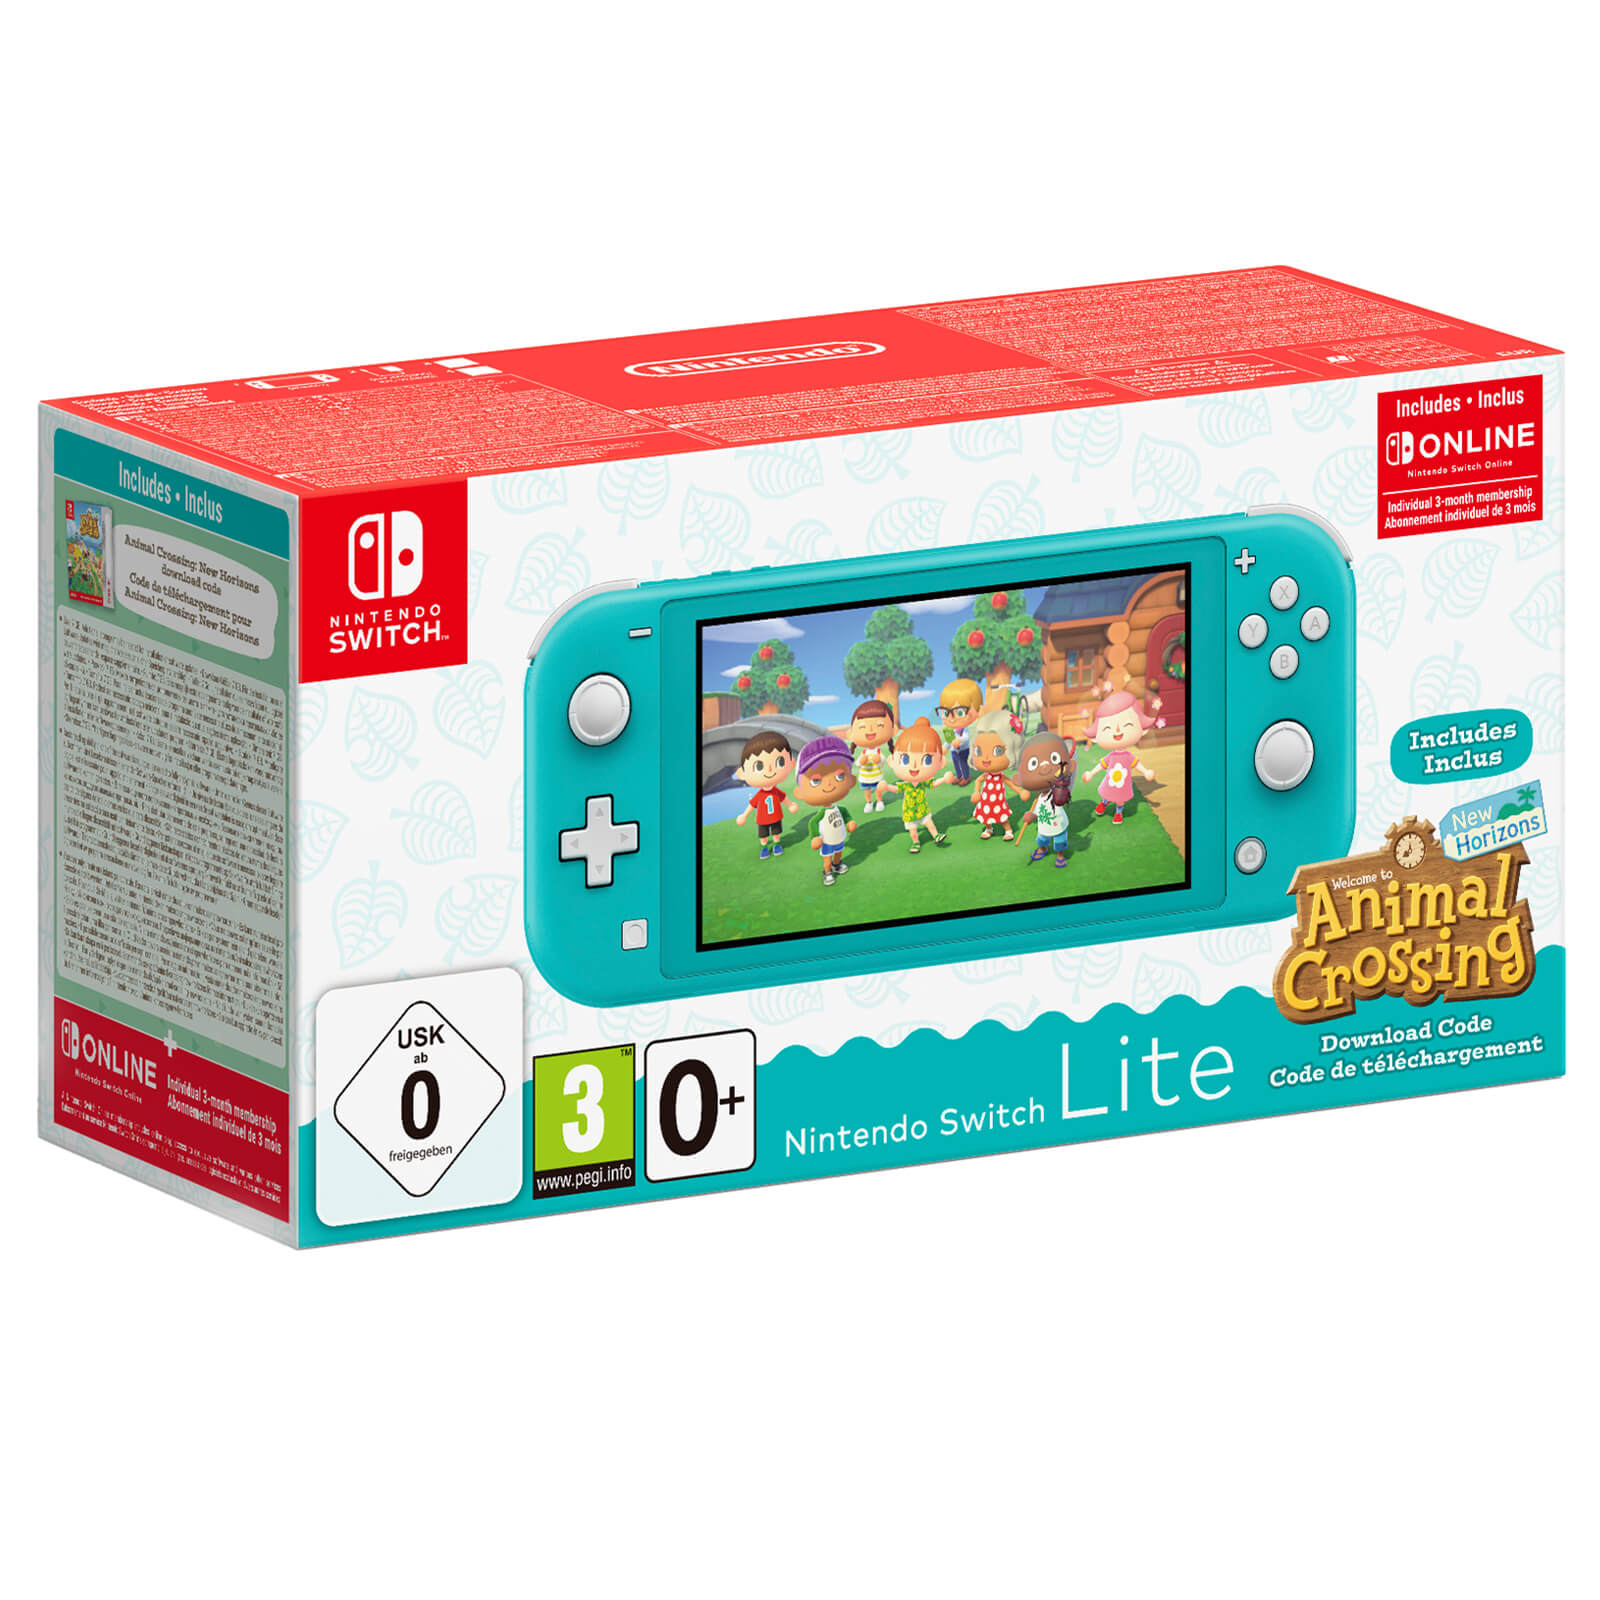 can the nintendo switch lite play animal crossing